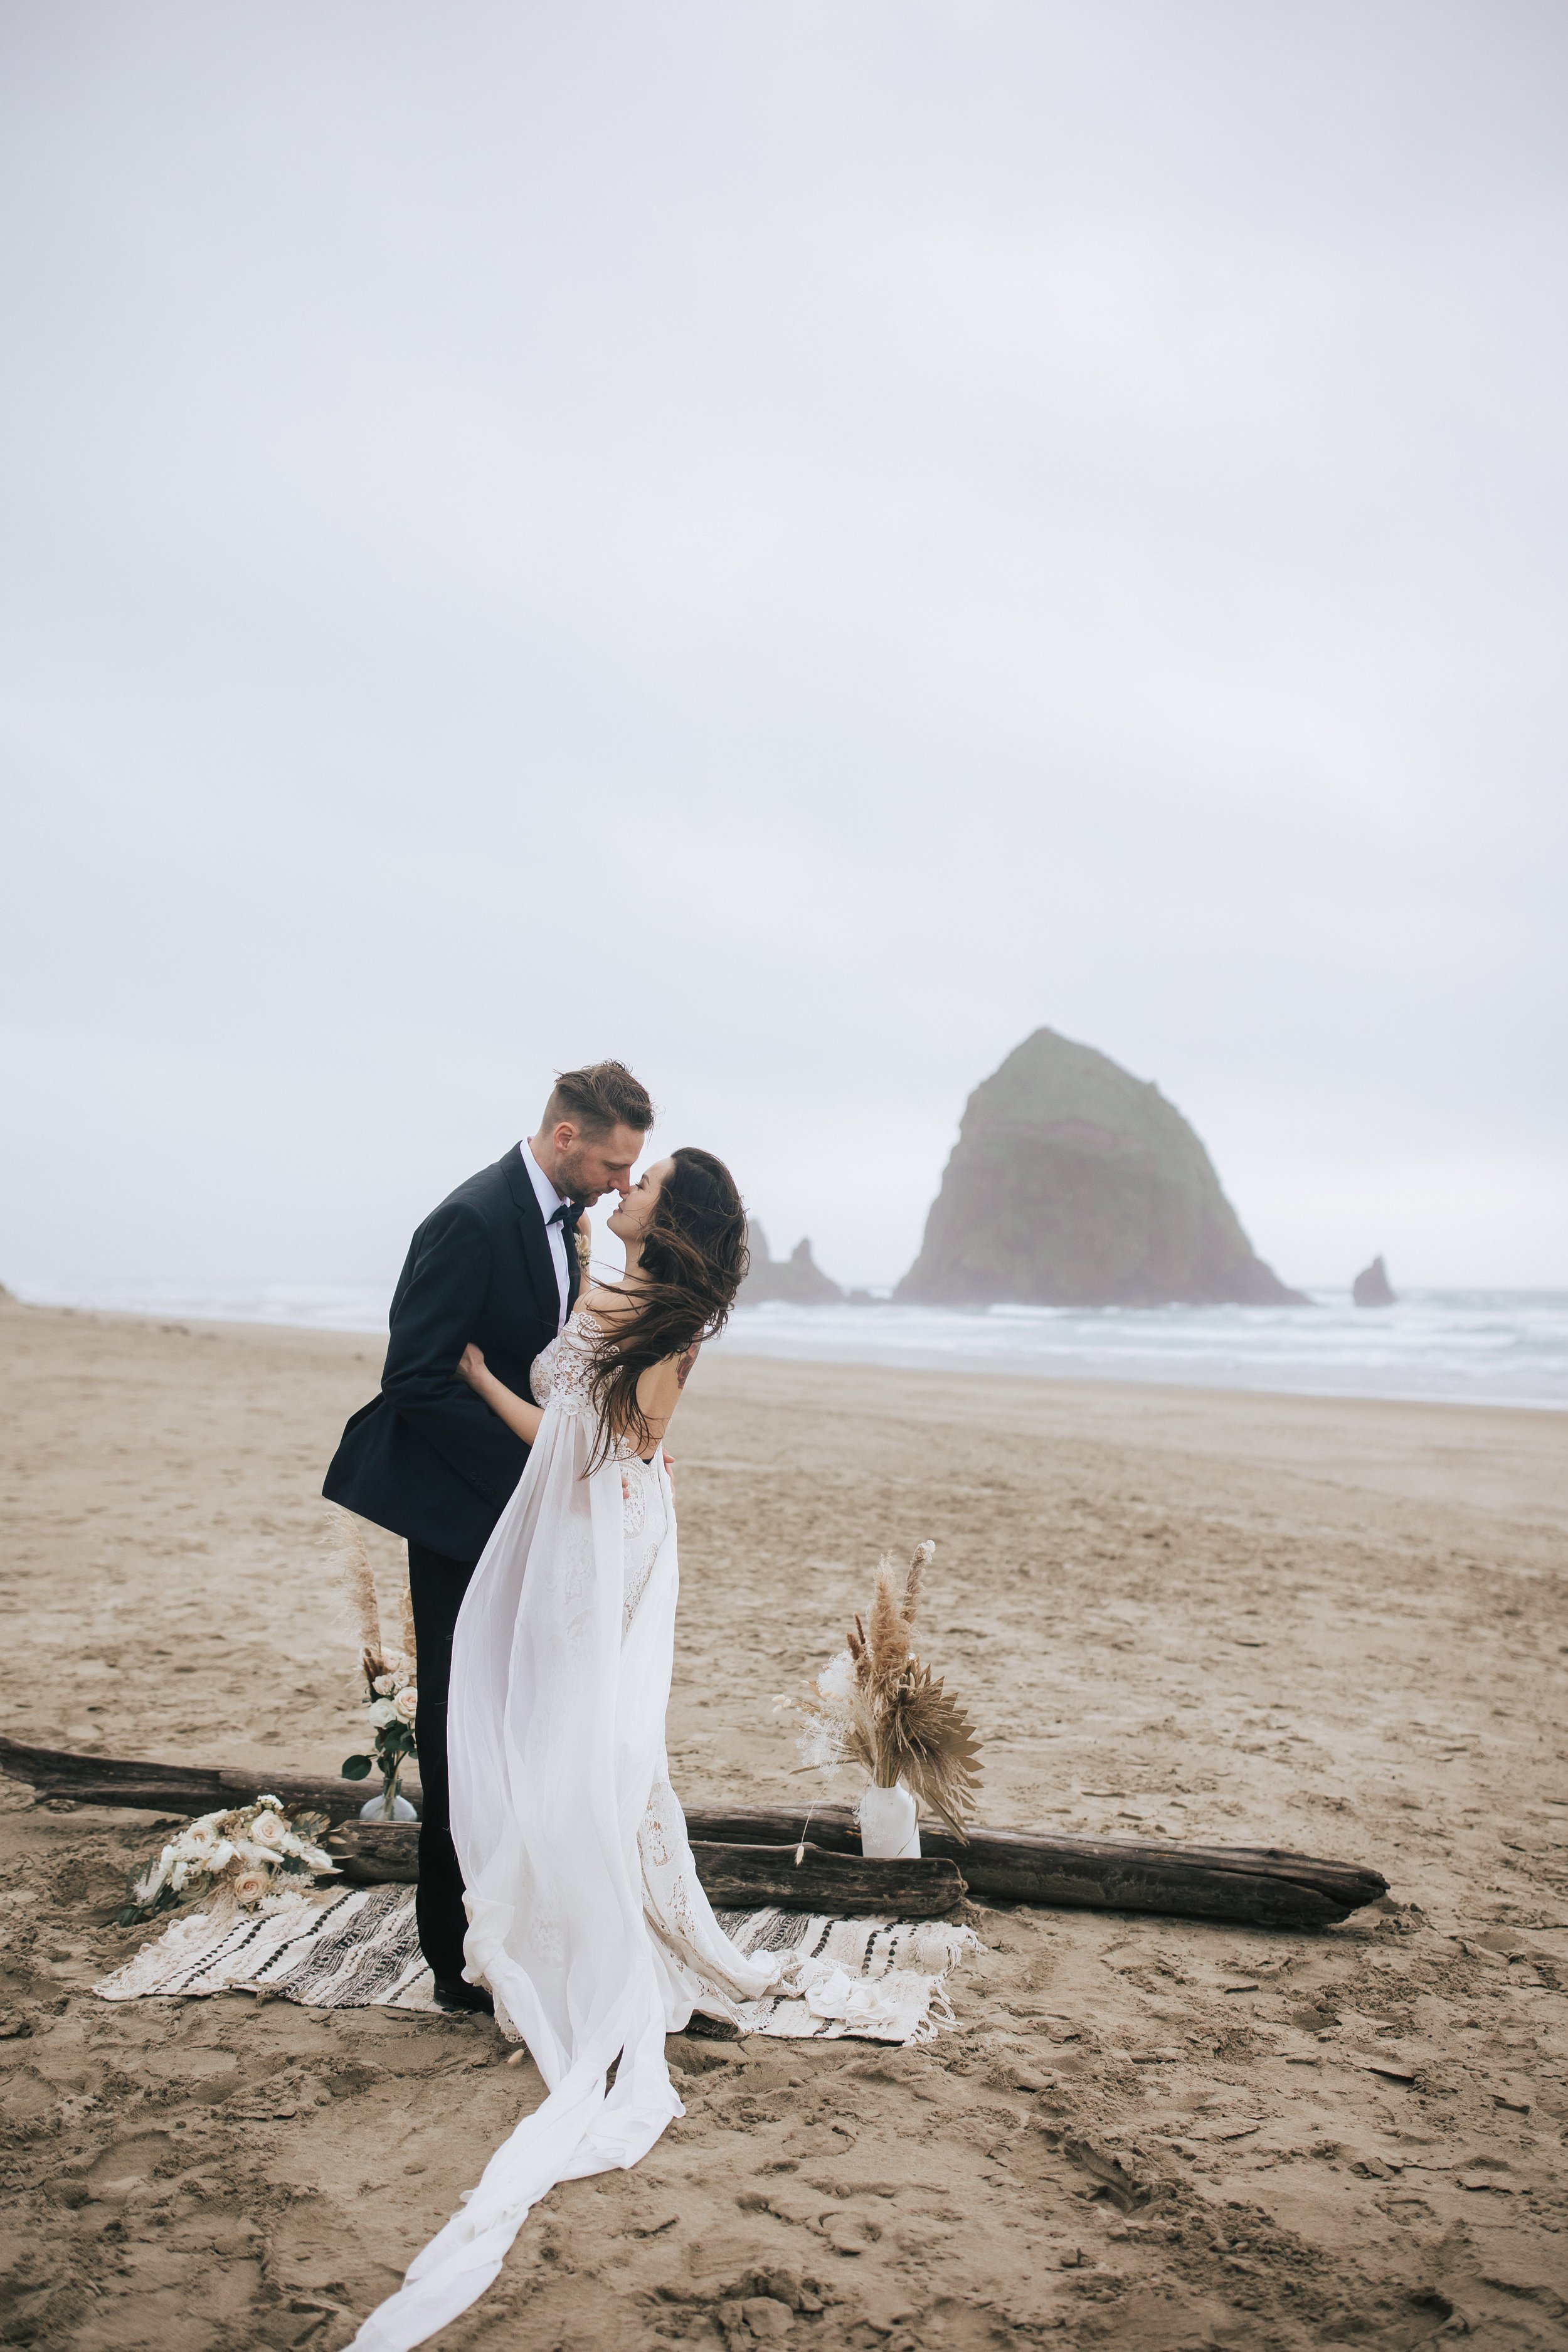  Bride and groom share a kiss oregon elopement learn how to elope to cannon beach in the pacific northwest with stunning wedding photography by emily jenkins photo elopement photographer seaside oregon cannon beach #pnw #pnwwedding #pnwelopement #can